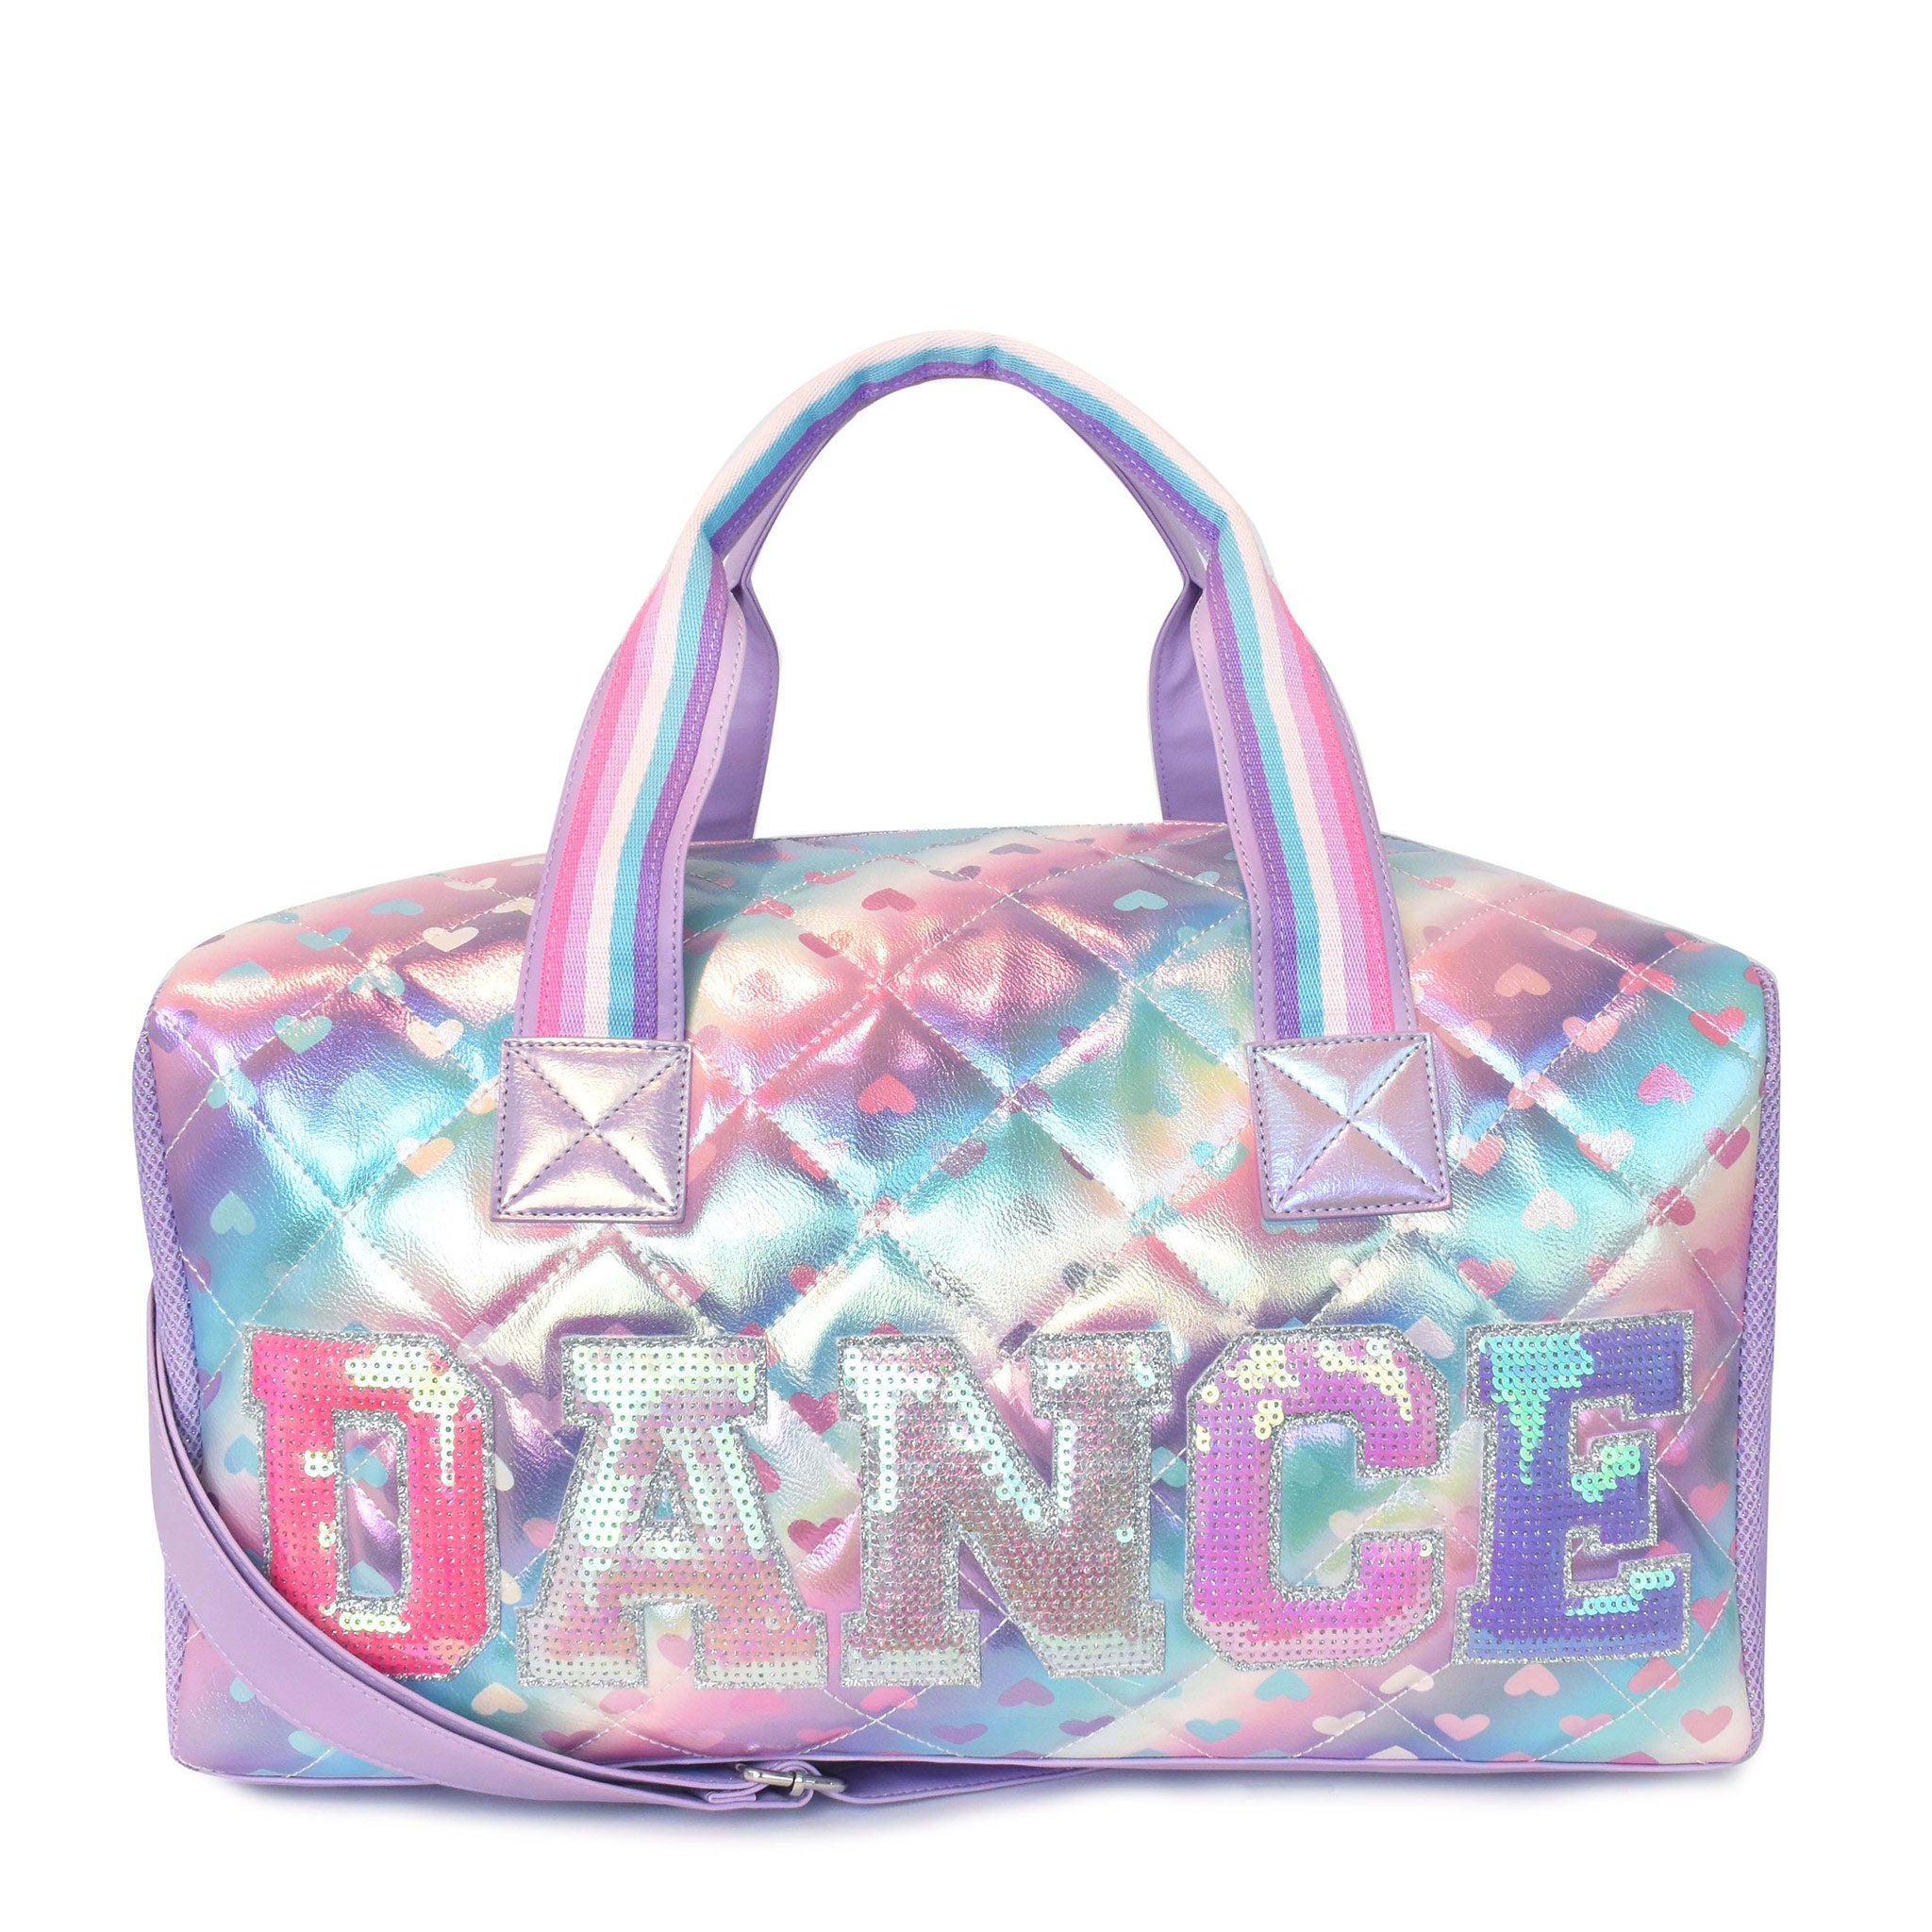 Front view of a metallic ombre heart printed large duffle bag with sequin varsity 'DANCE' lettering